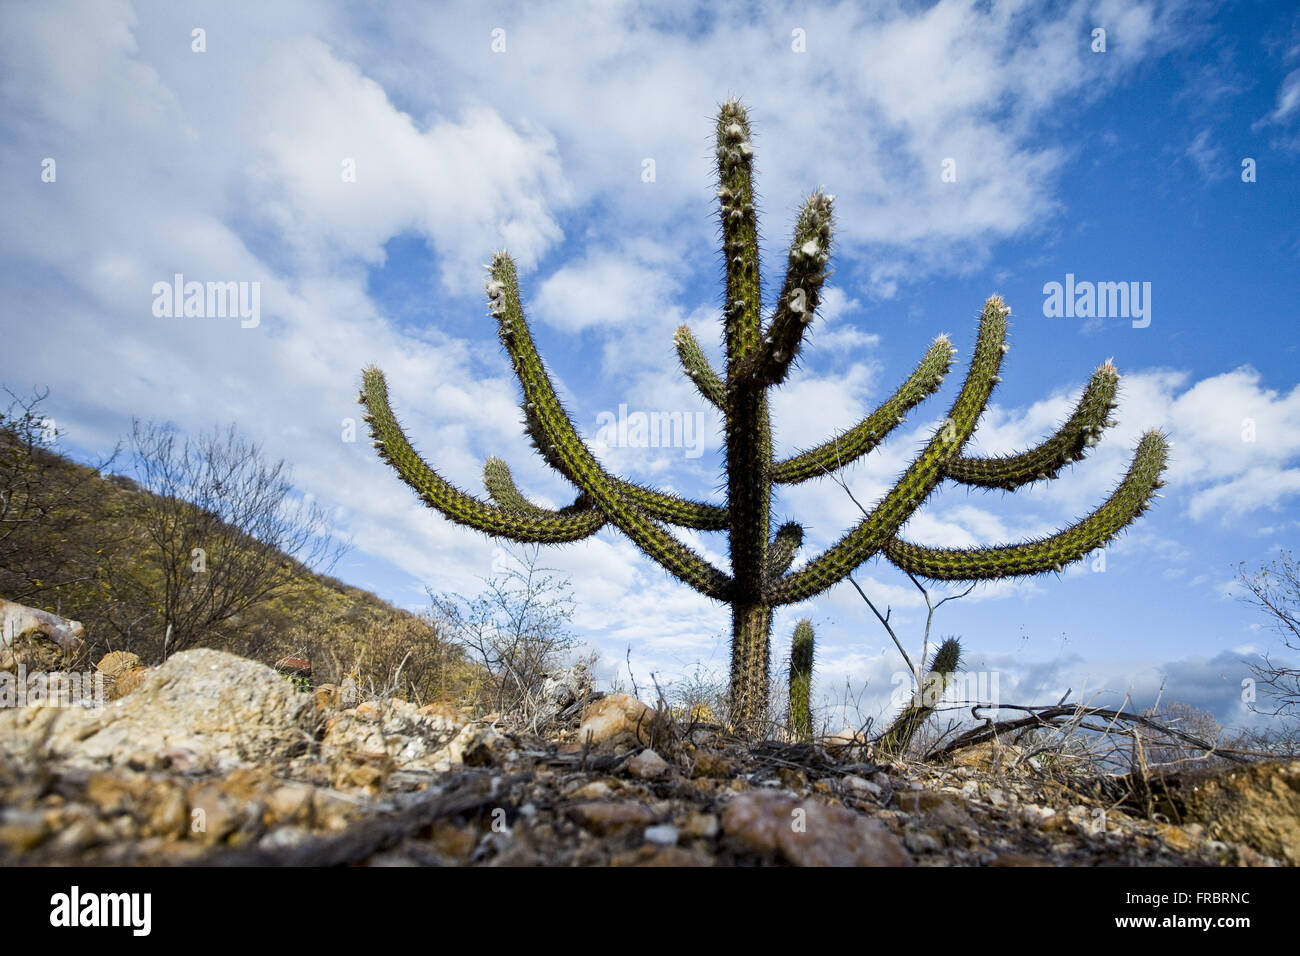 Cactus xique-xique in the bush - the region served Stock Photo